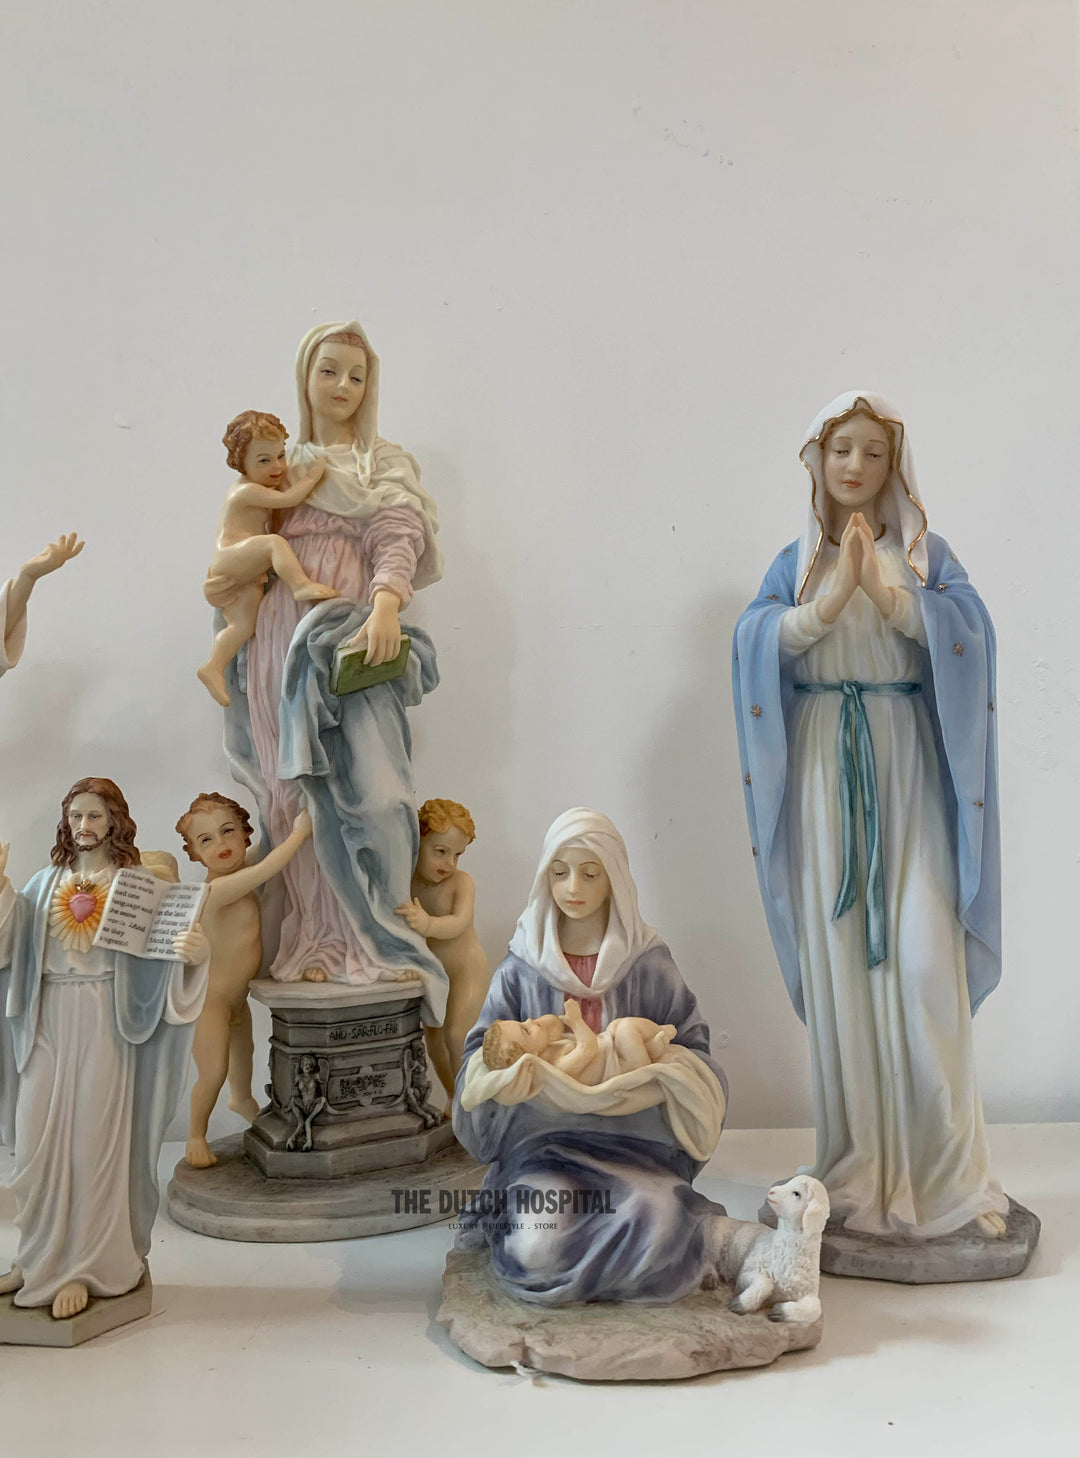 Virgin Mary – Christian Art Sculptures – Christ – Statue of Mary